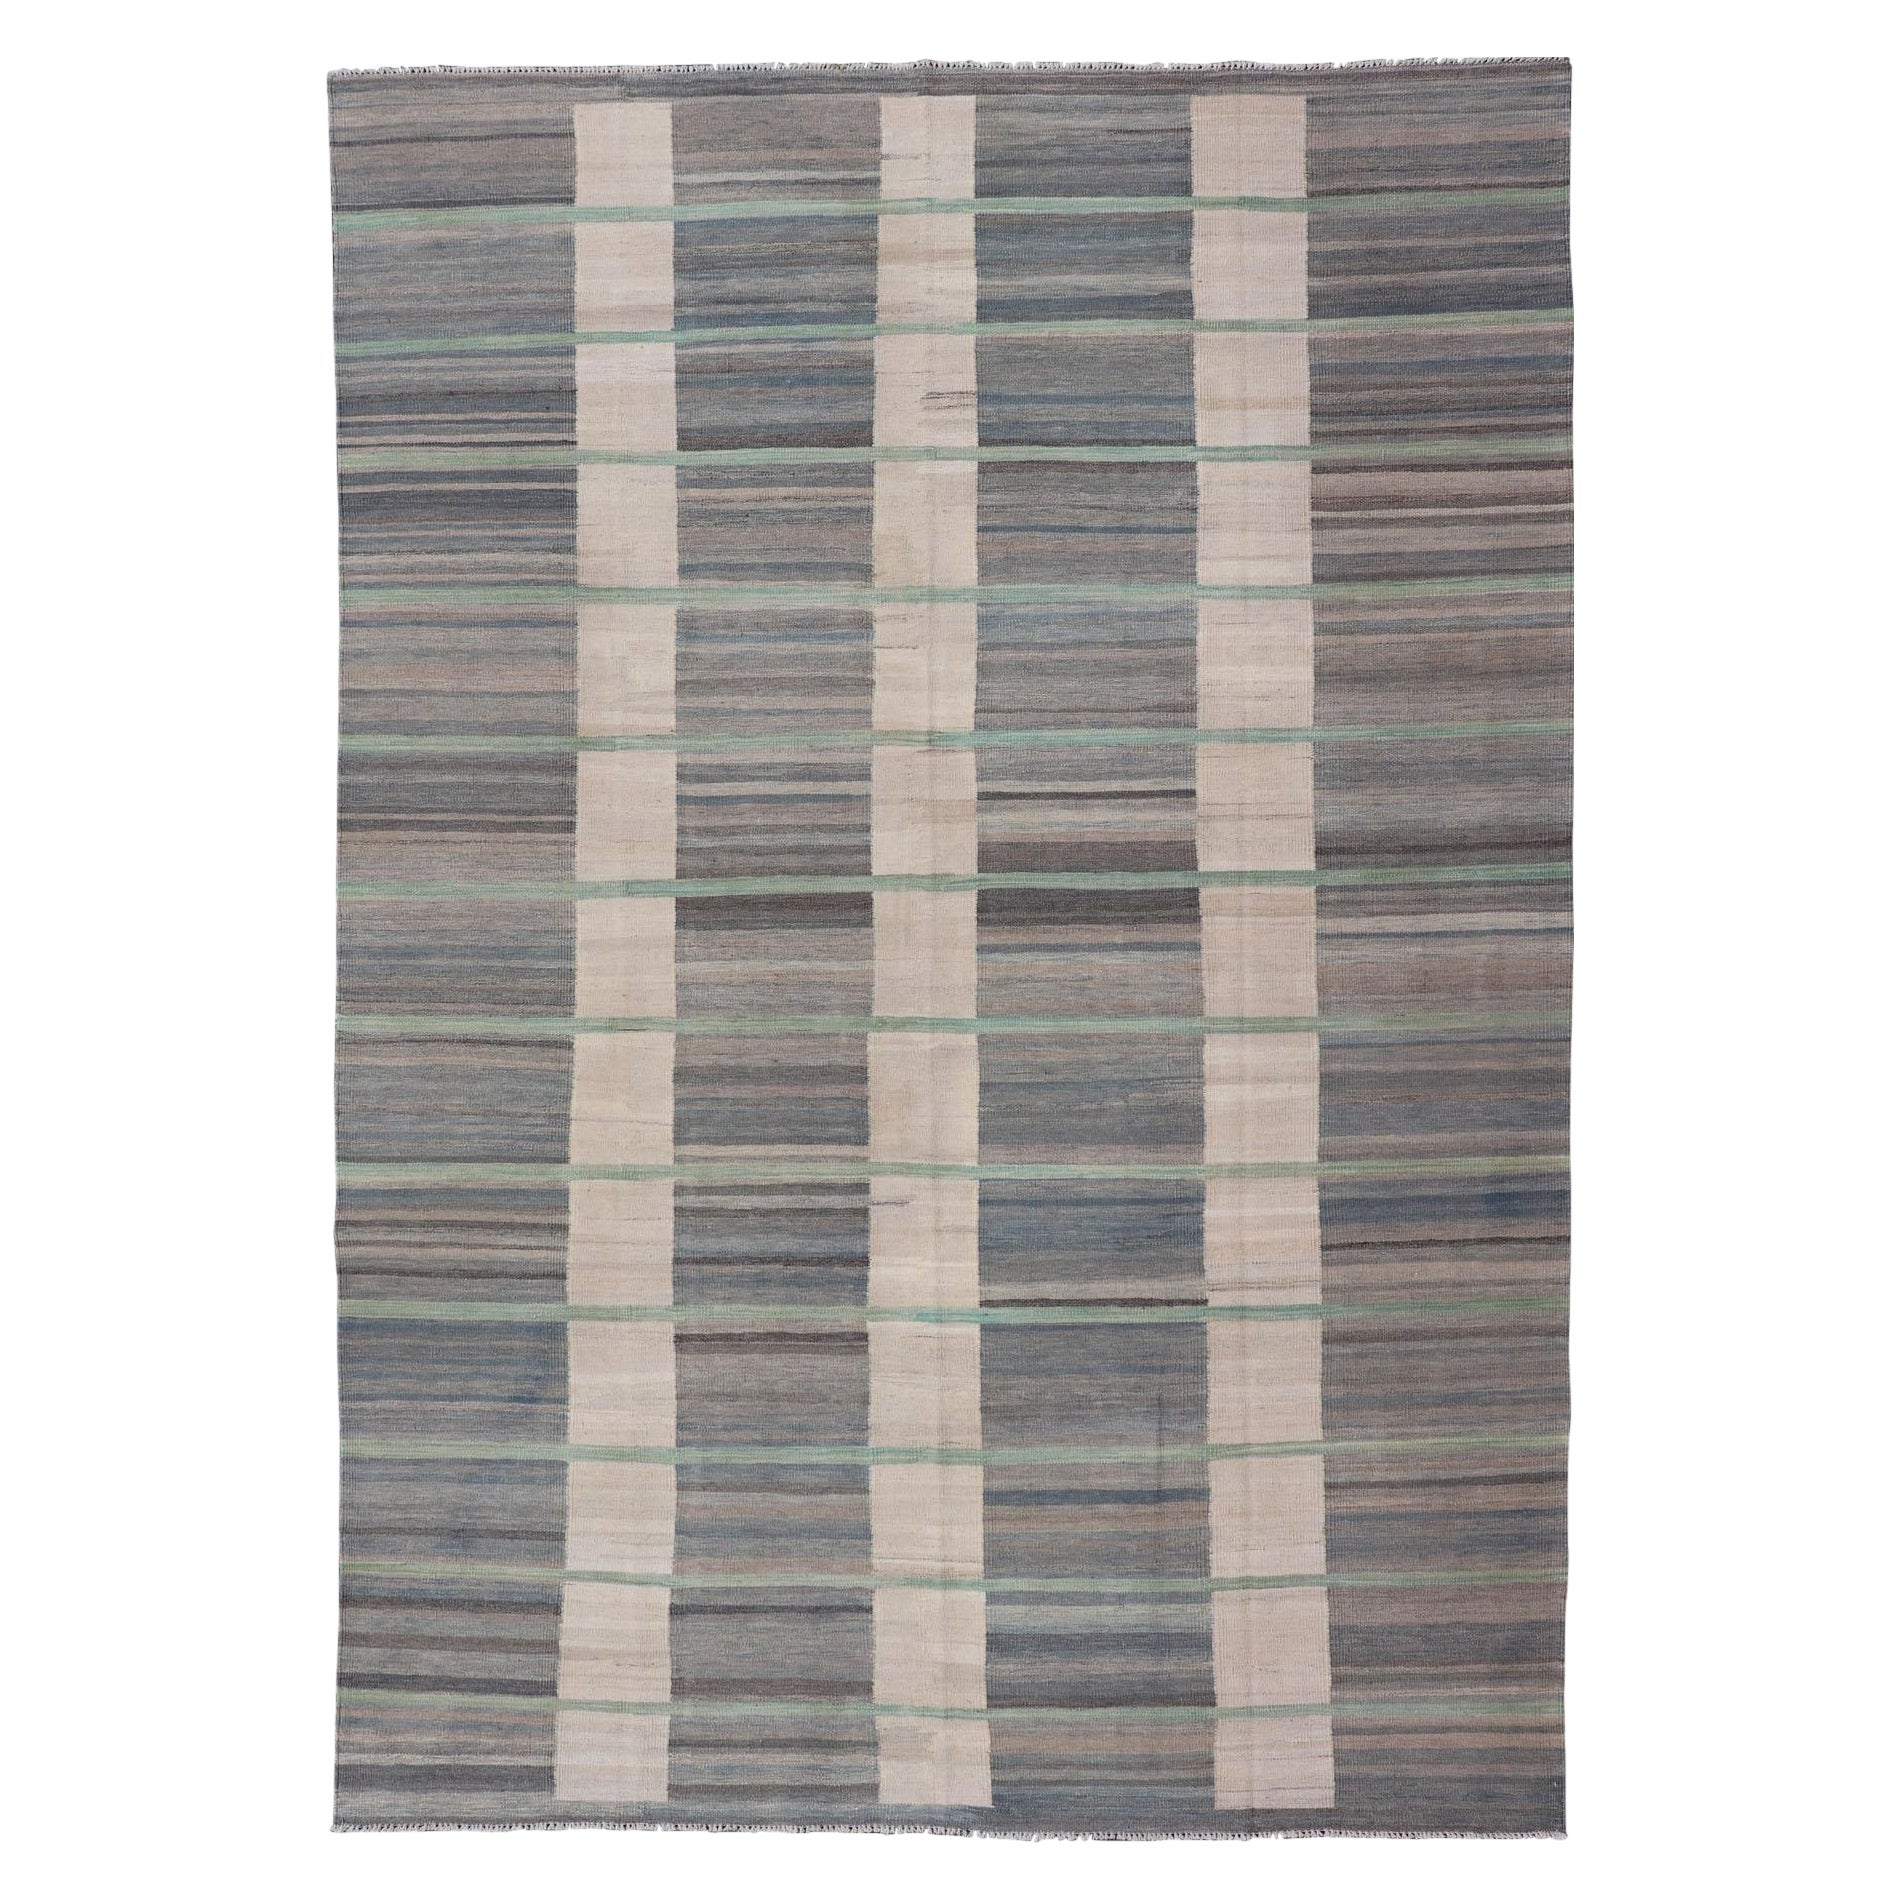  Flat-Weave Modern Kilim Rug in shades of Gray, Brown, Cream, Blue and Green